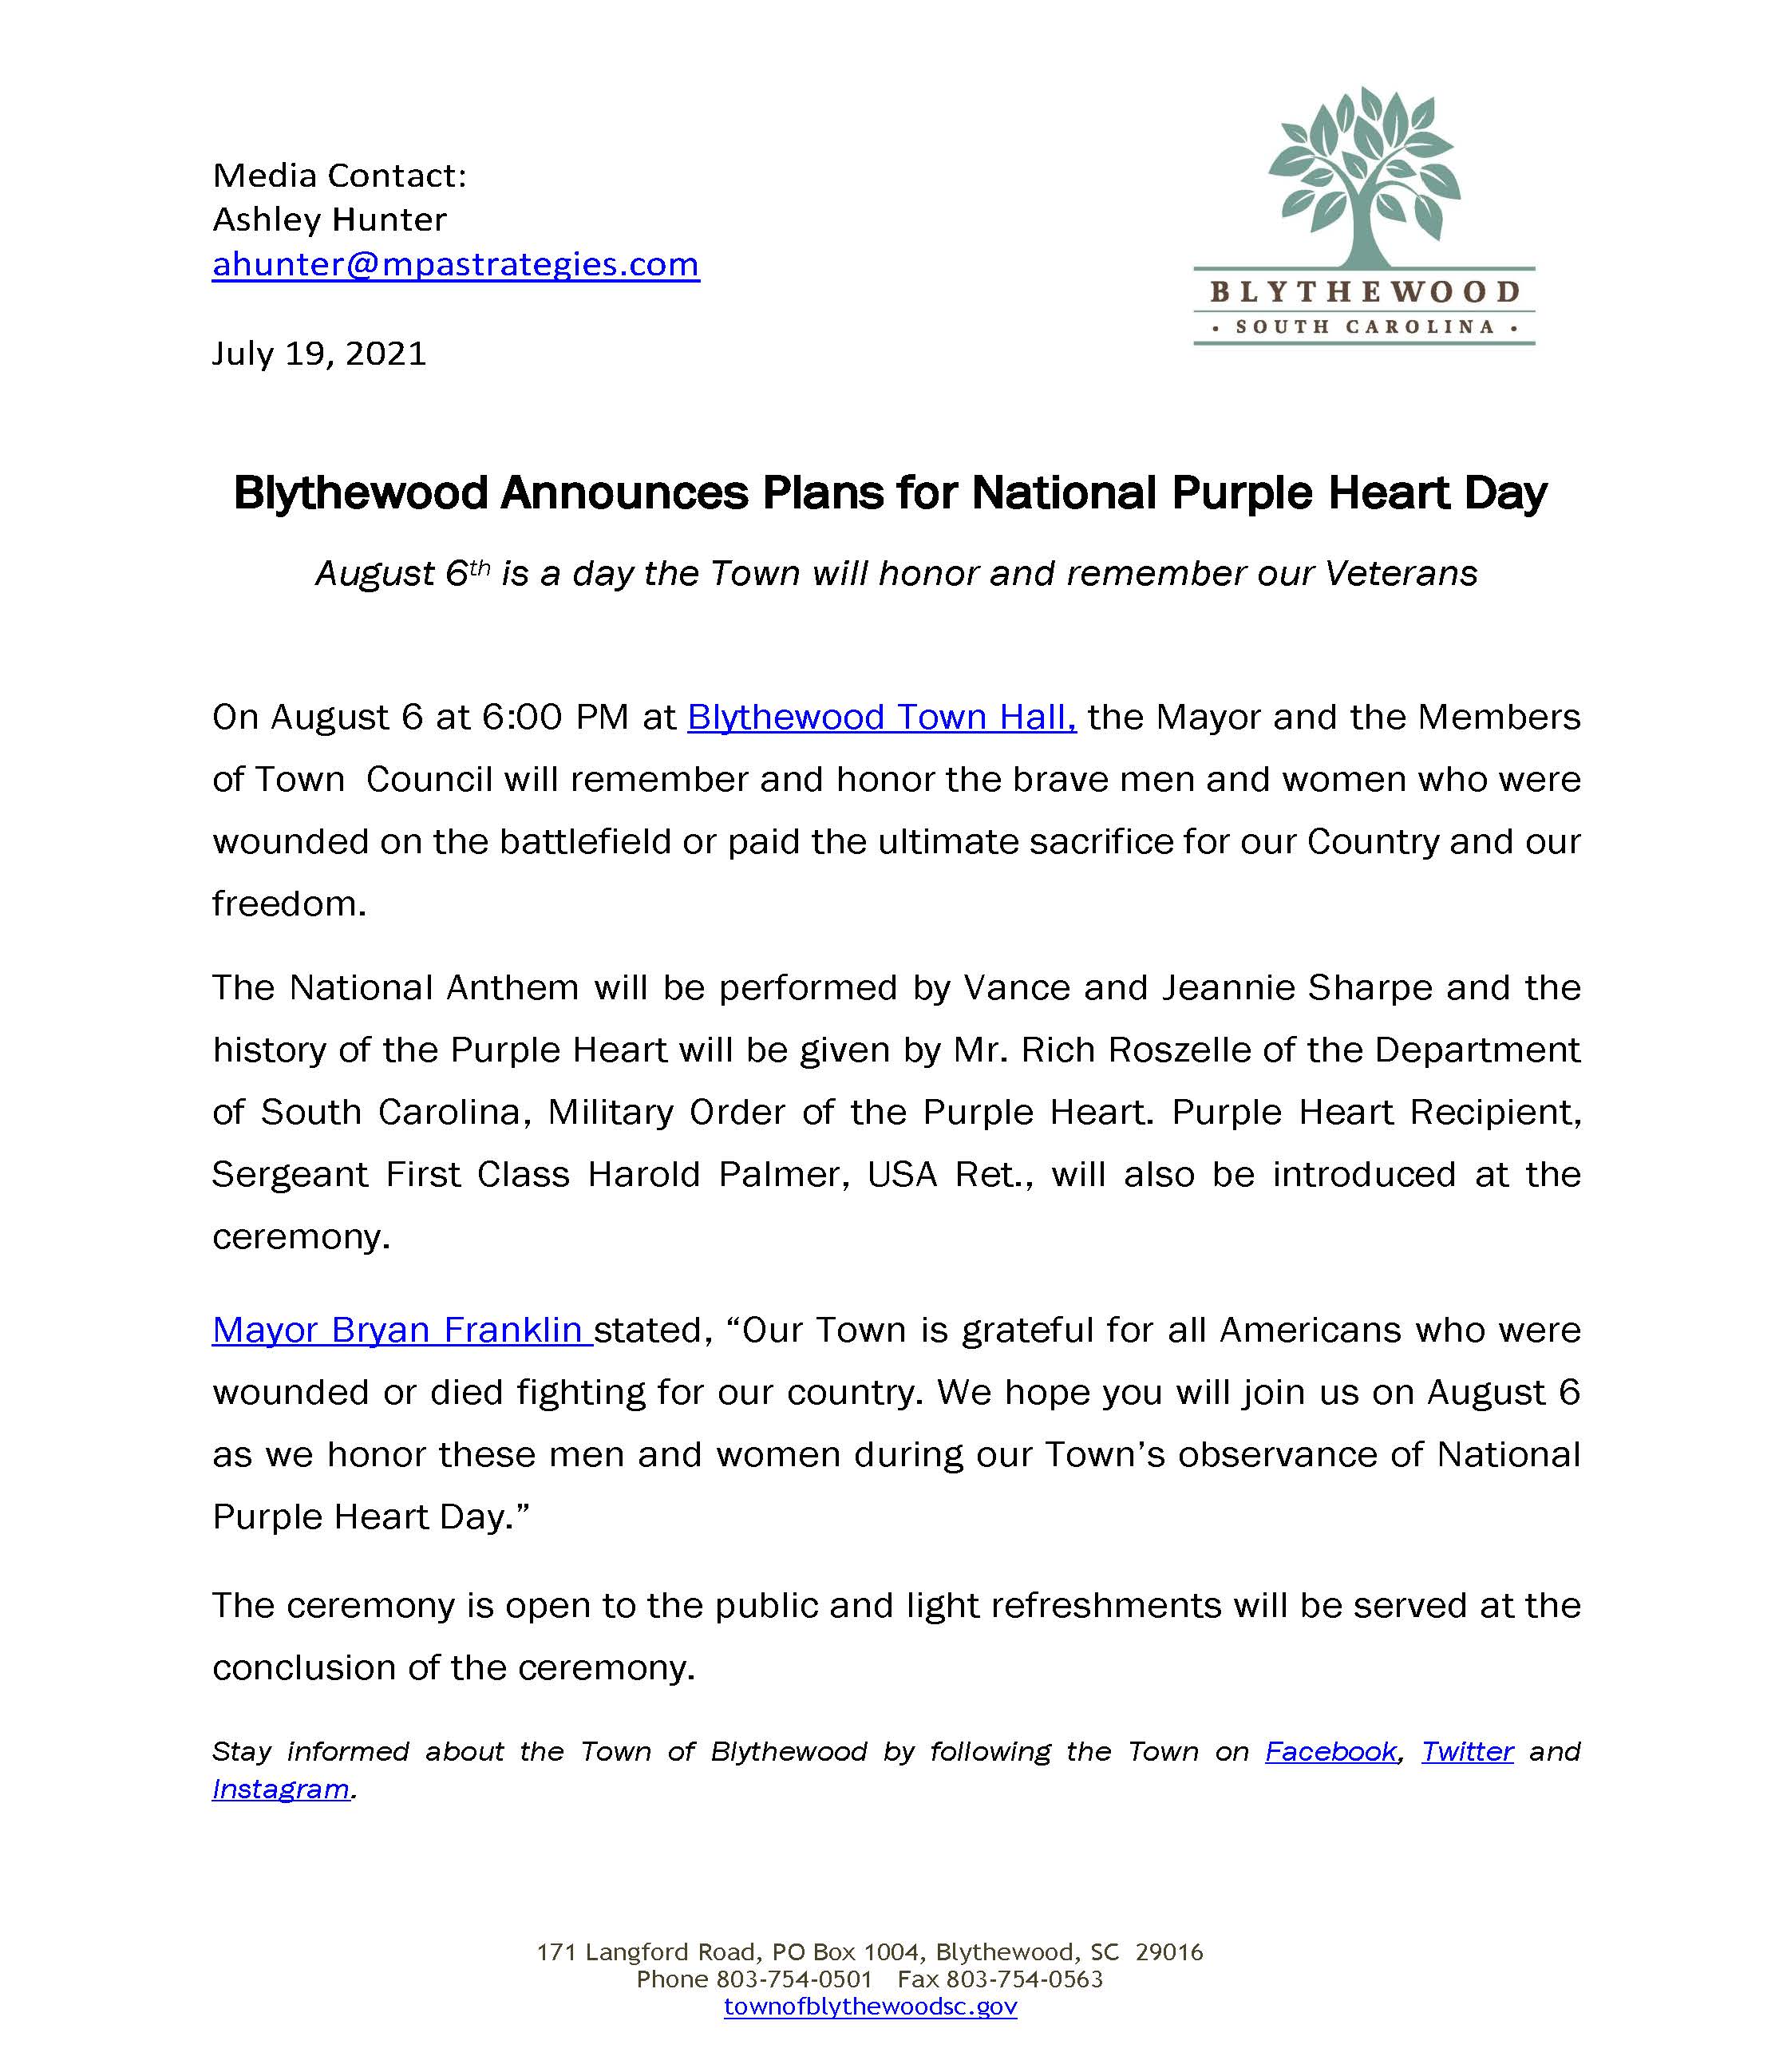 Blythewood Announces Plans for National Purple Heart Day